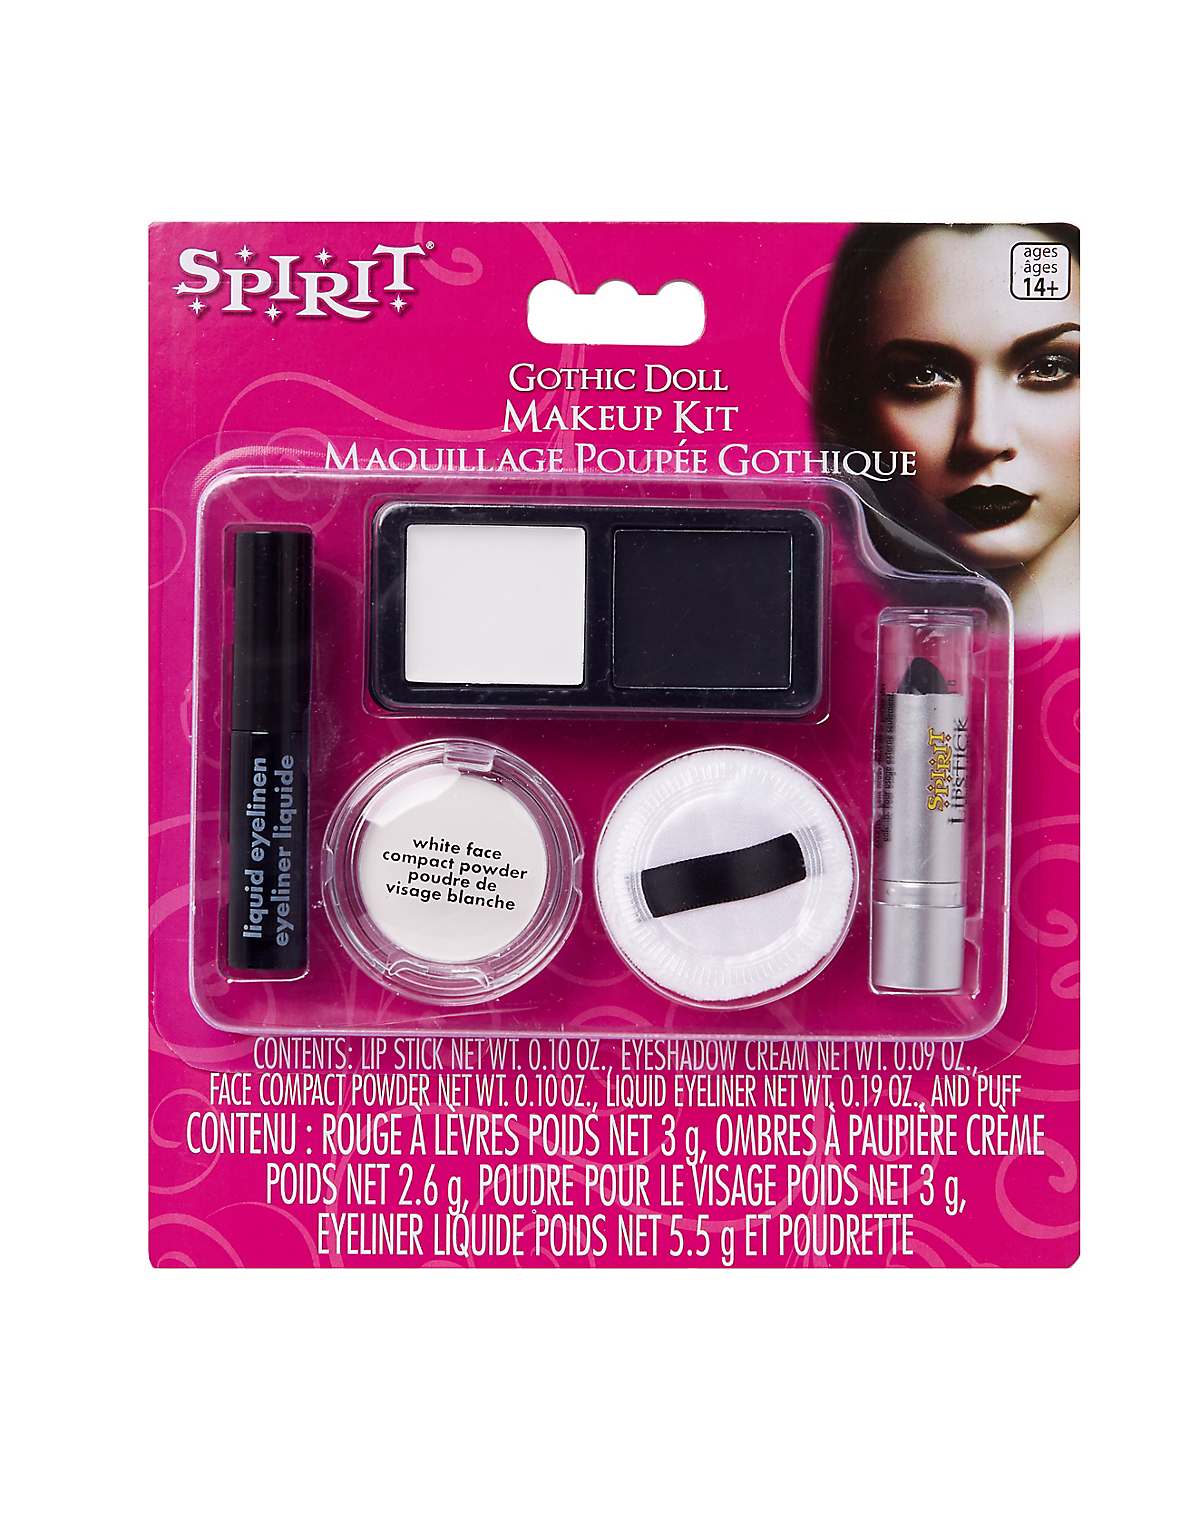 Gothic doll makeup character kit